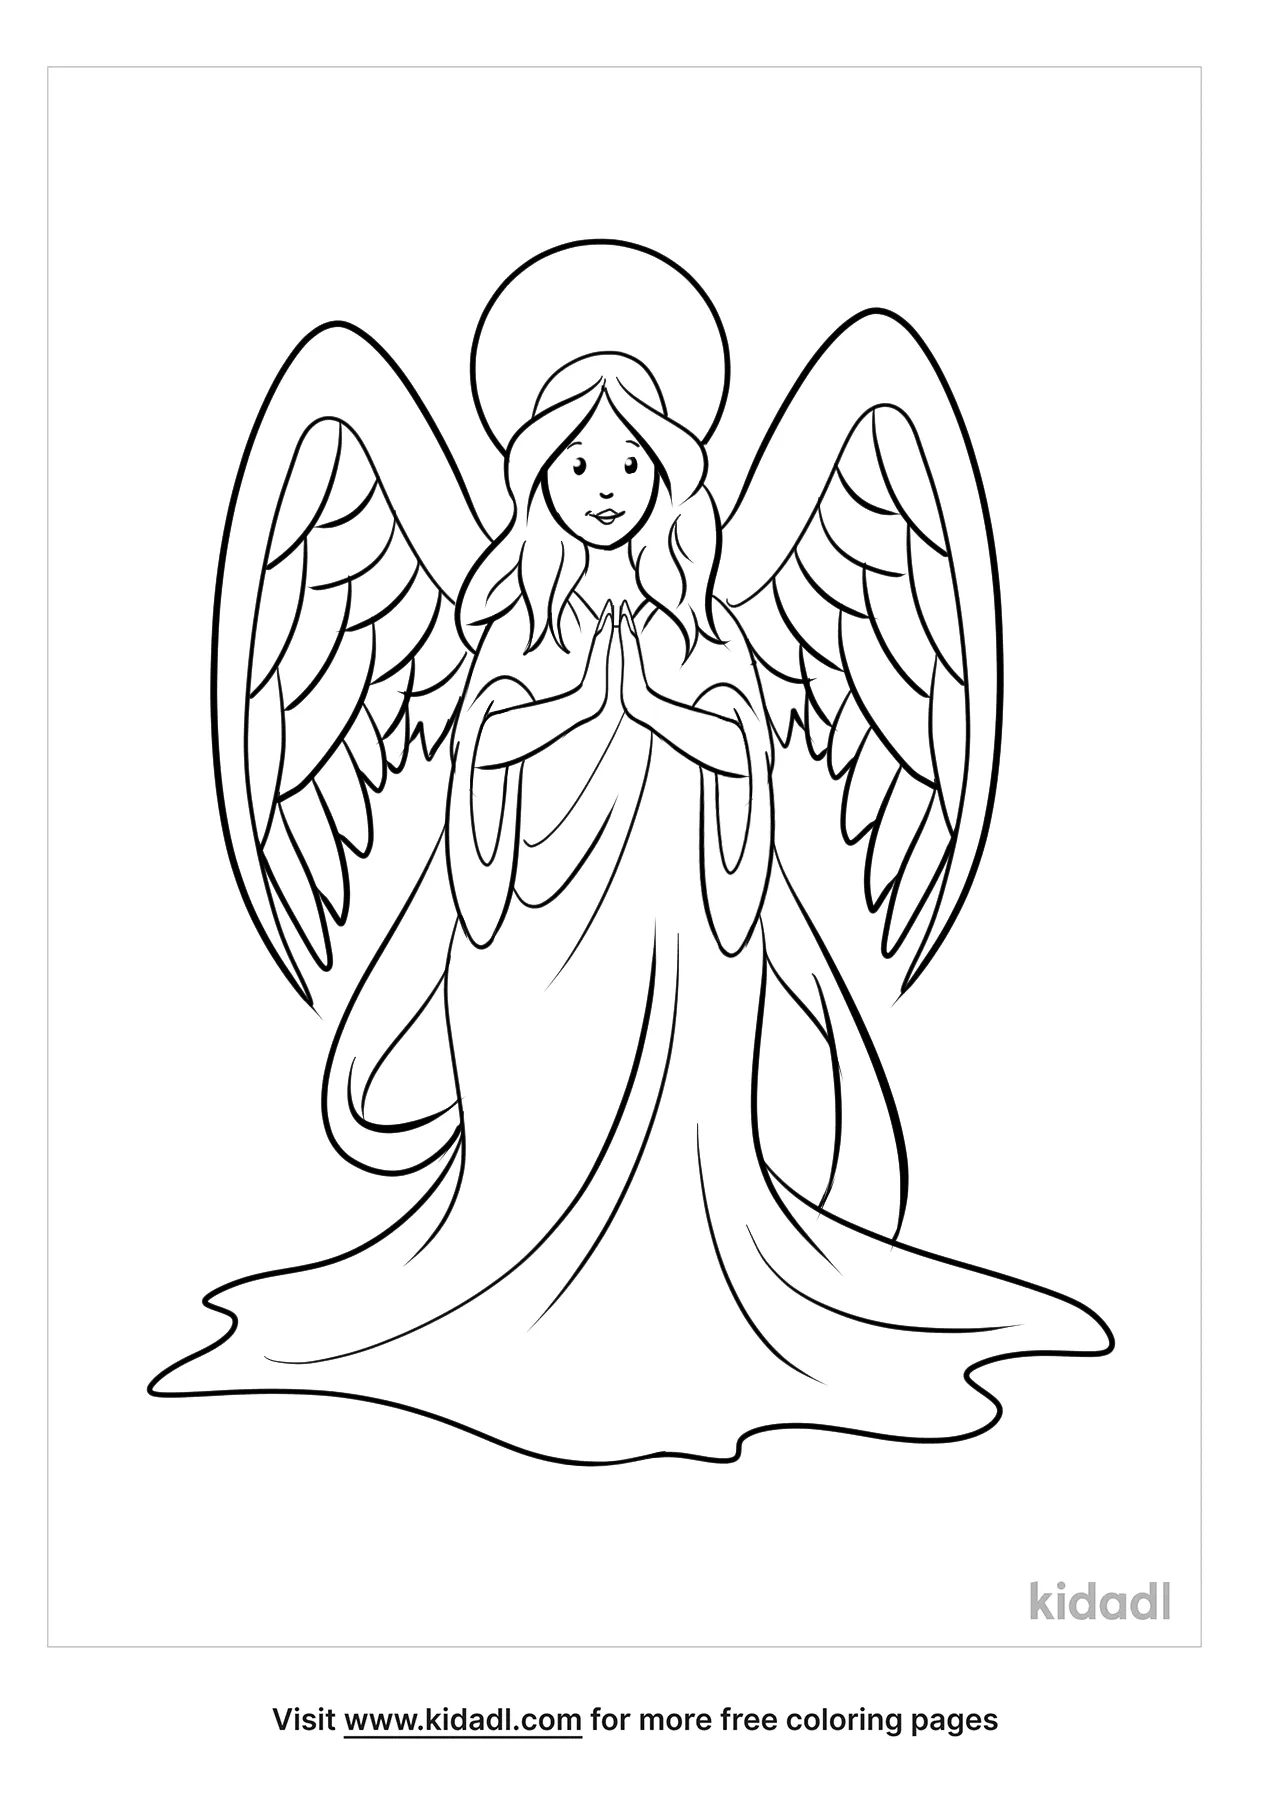 Angel Coloring Pages   Free Bible Coloring Pages   Kidadl